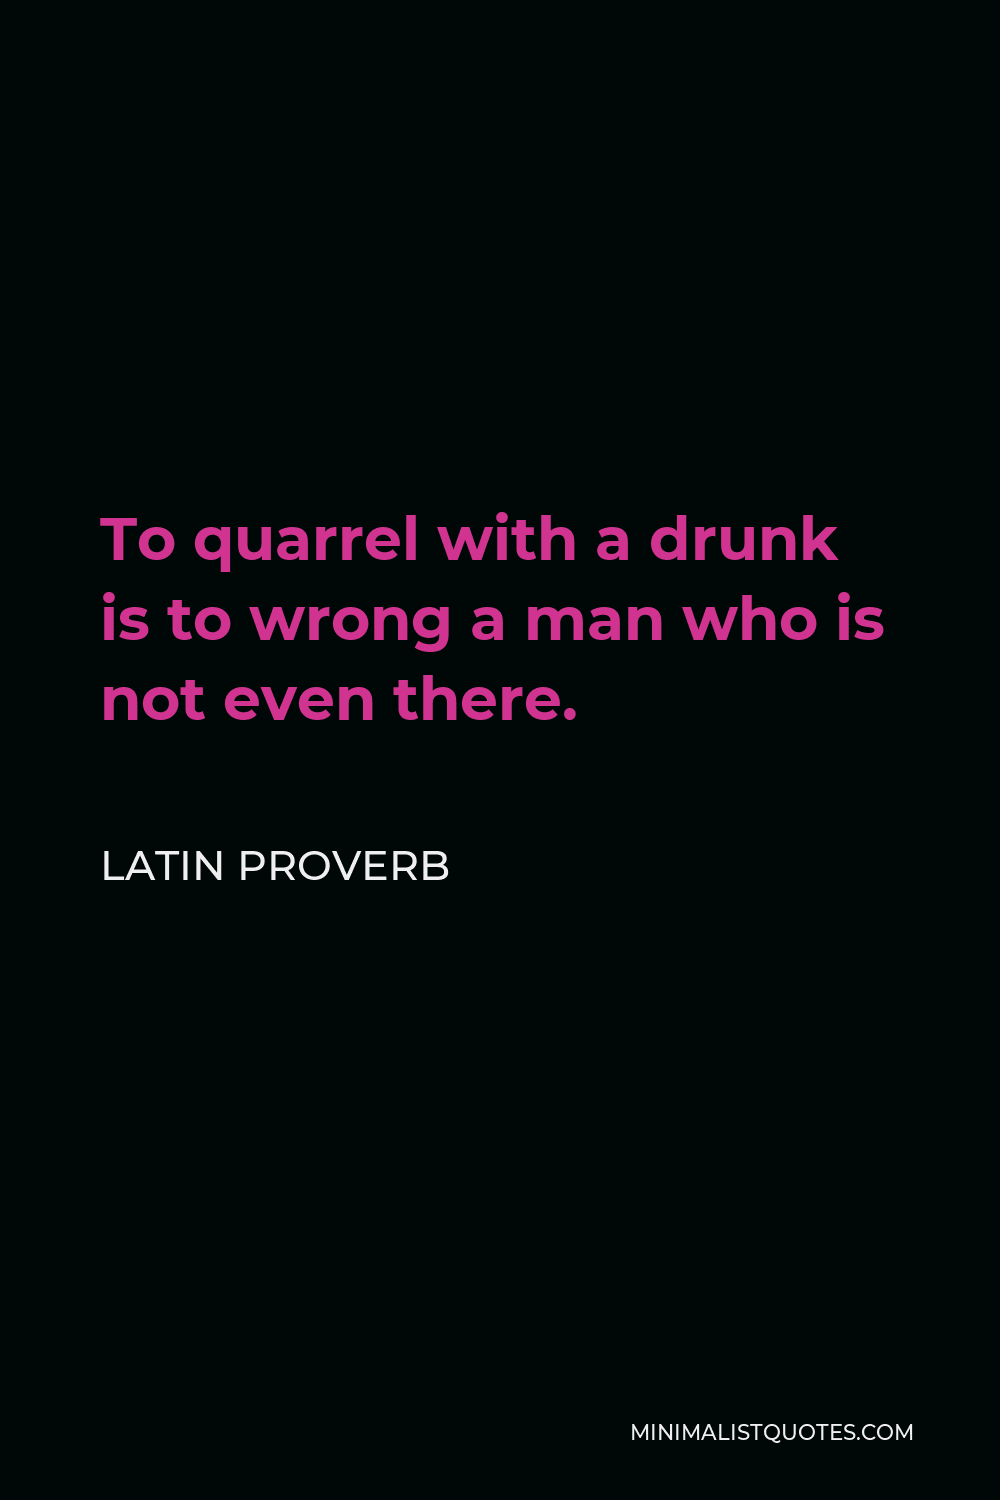 Latin Proverb Quote - To quarrel with a drunk is to wrong a man who is not even there.